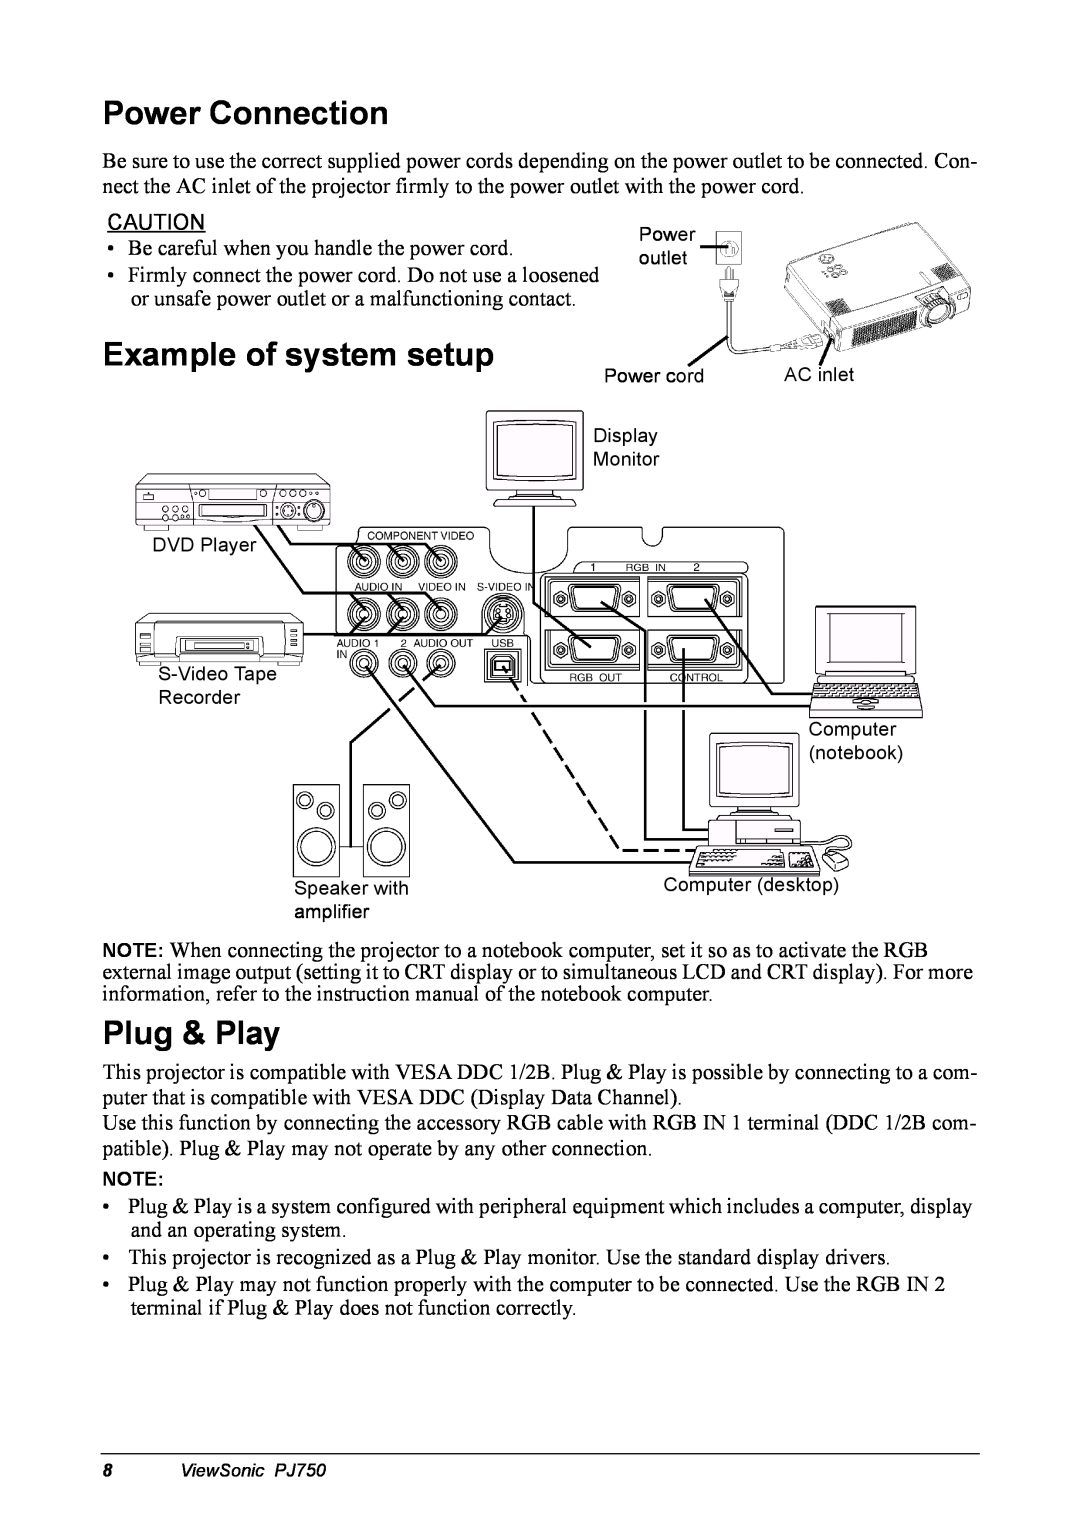 ViewSonic 300 manual Power Connection, Example of system setup, Plug & Play 